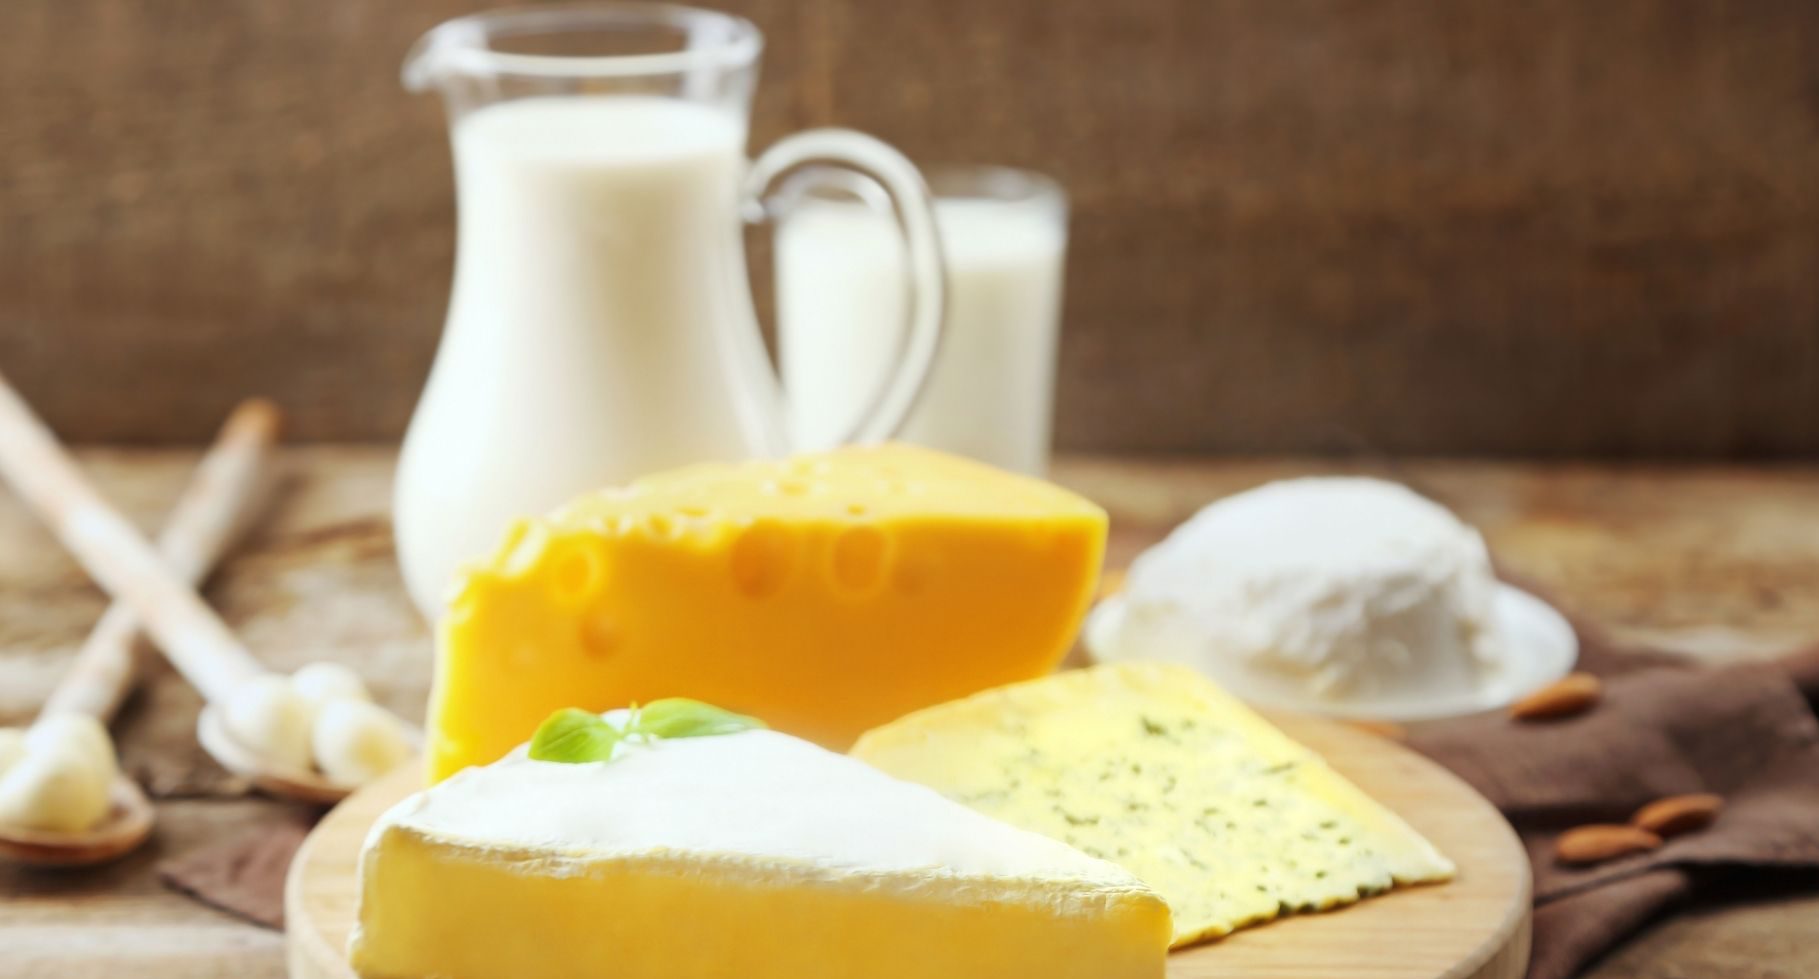 Global Dairy Food Market Overview And Prospects – Includes Dairy Food Market Size